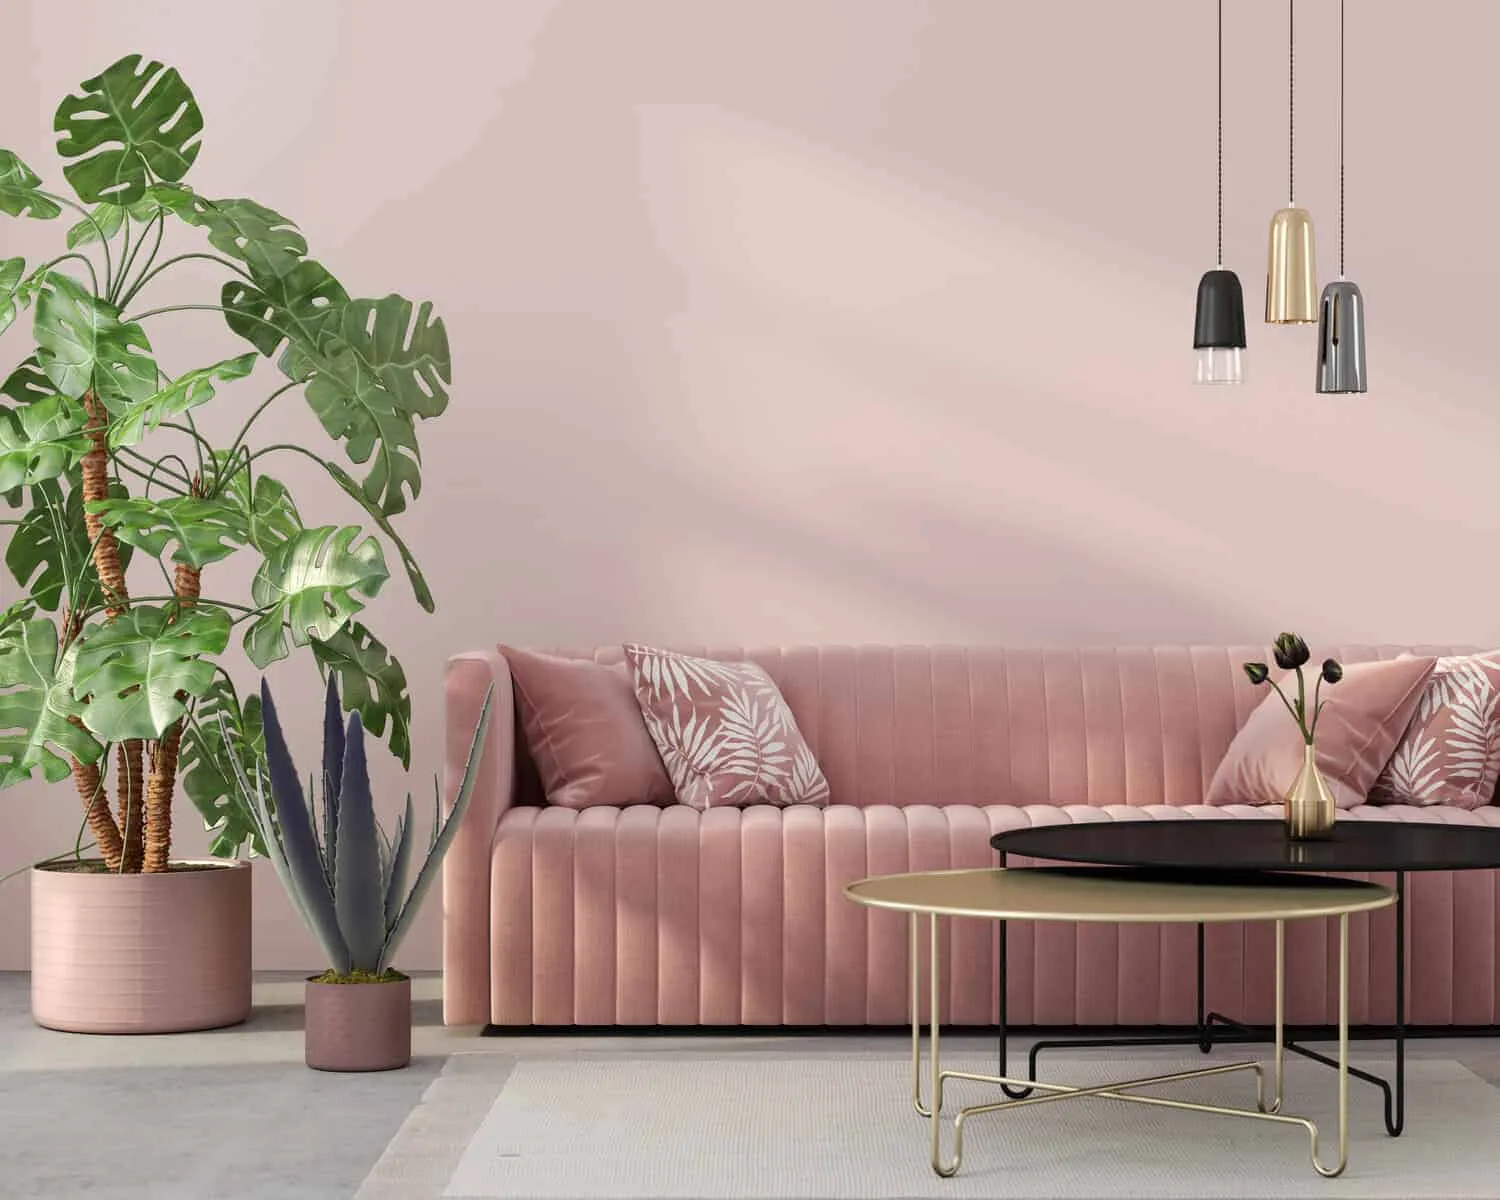 Pastel pink colour walls with pastel pink sofa for this ،me